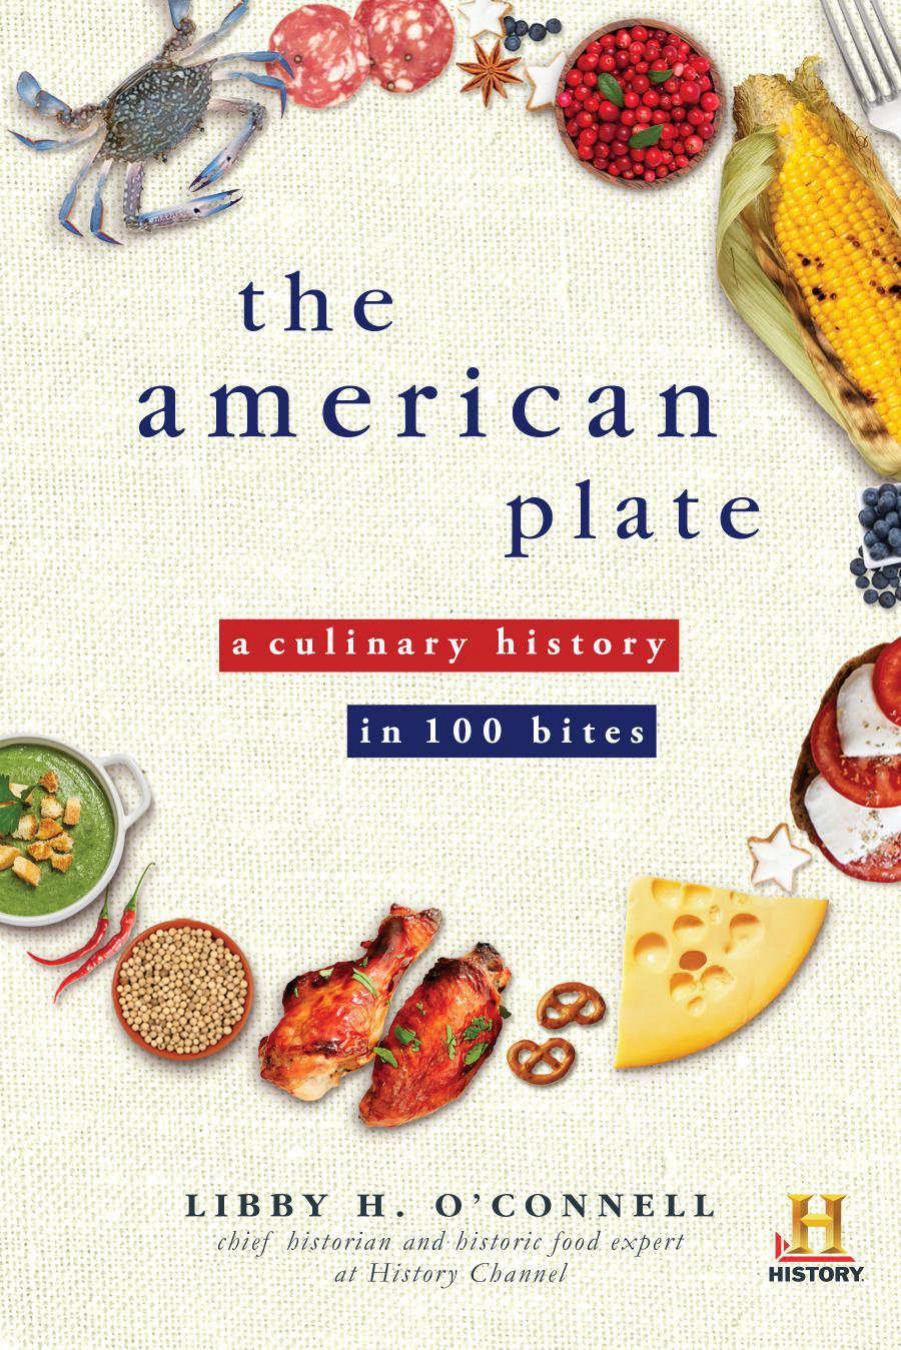 American Plate: A Culinary History in 100 Bites